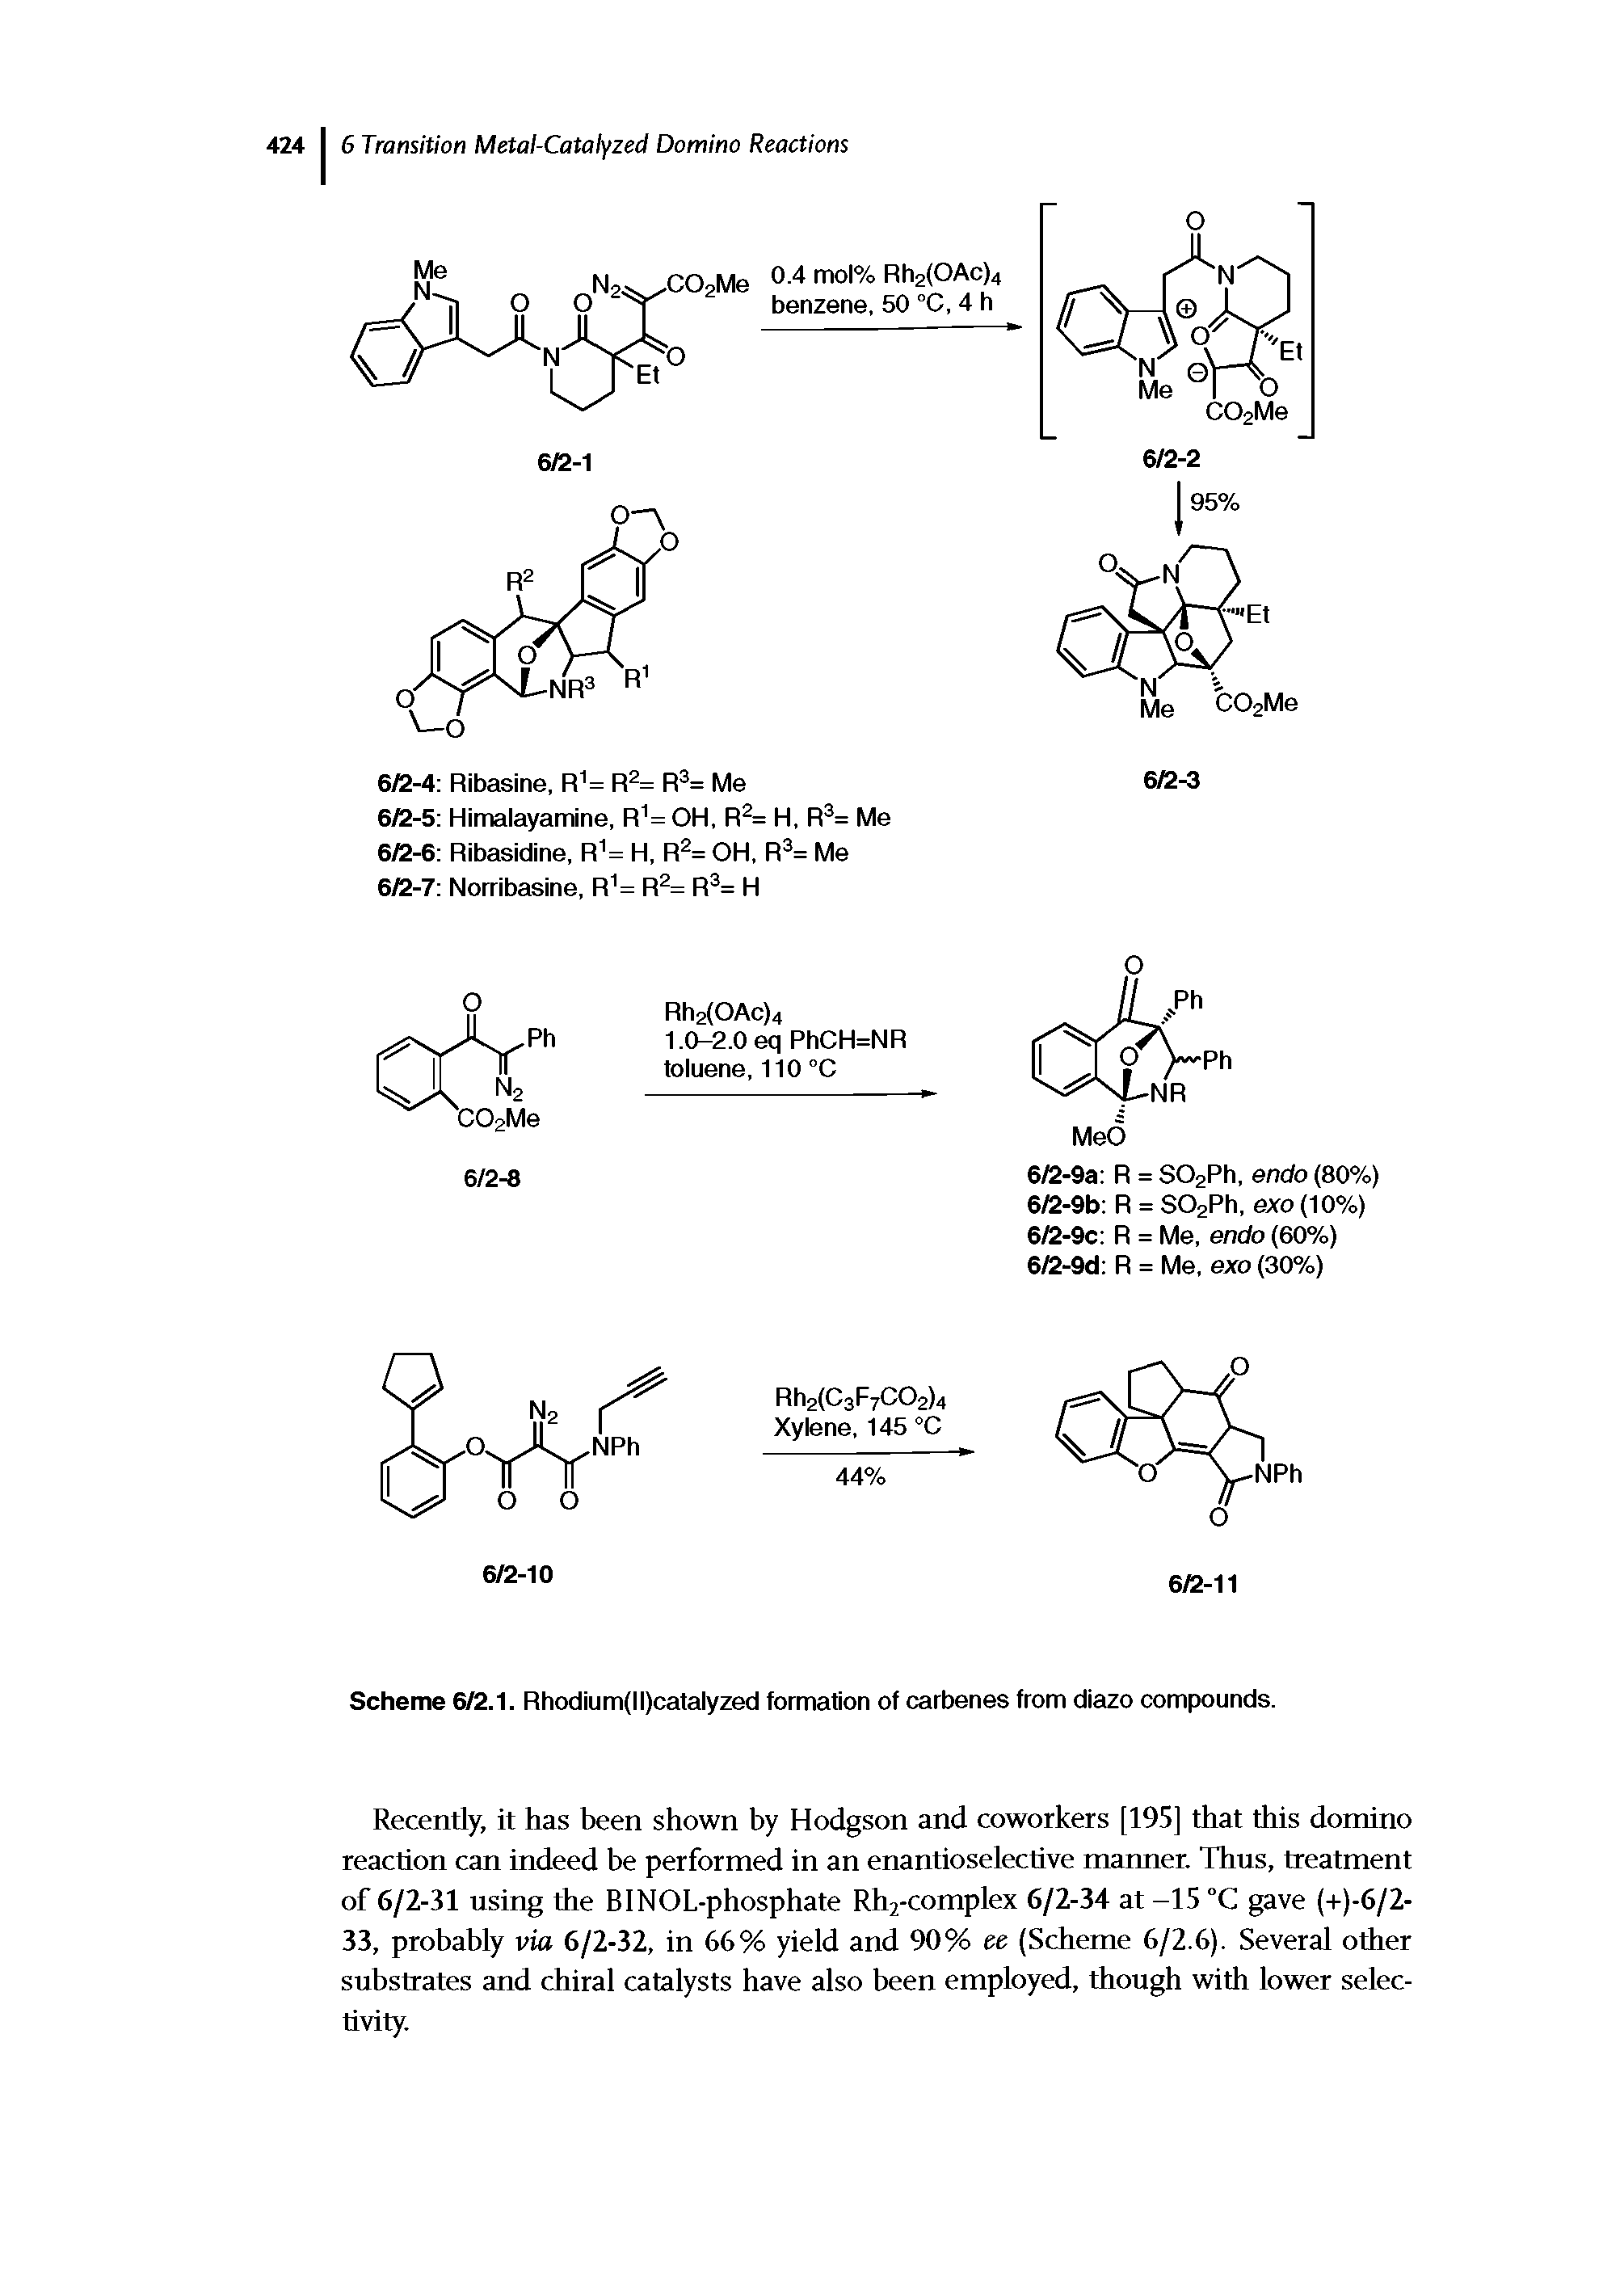 Scheme 6/2.1. Rhodium(ll)catalyzed formation of carbenes from diazo compounds.